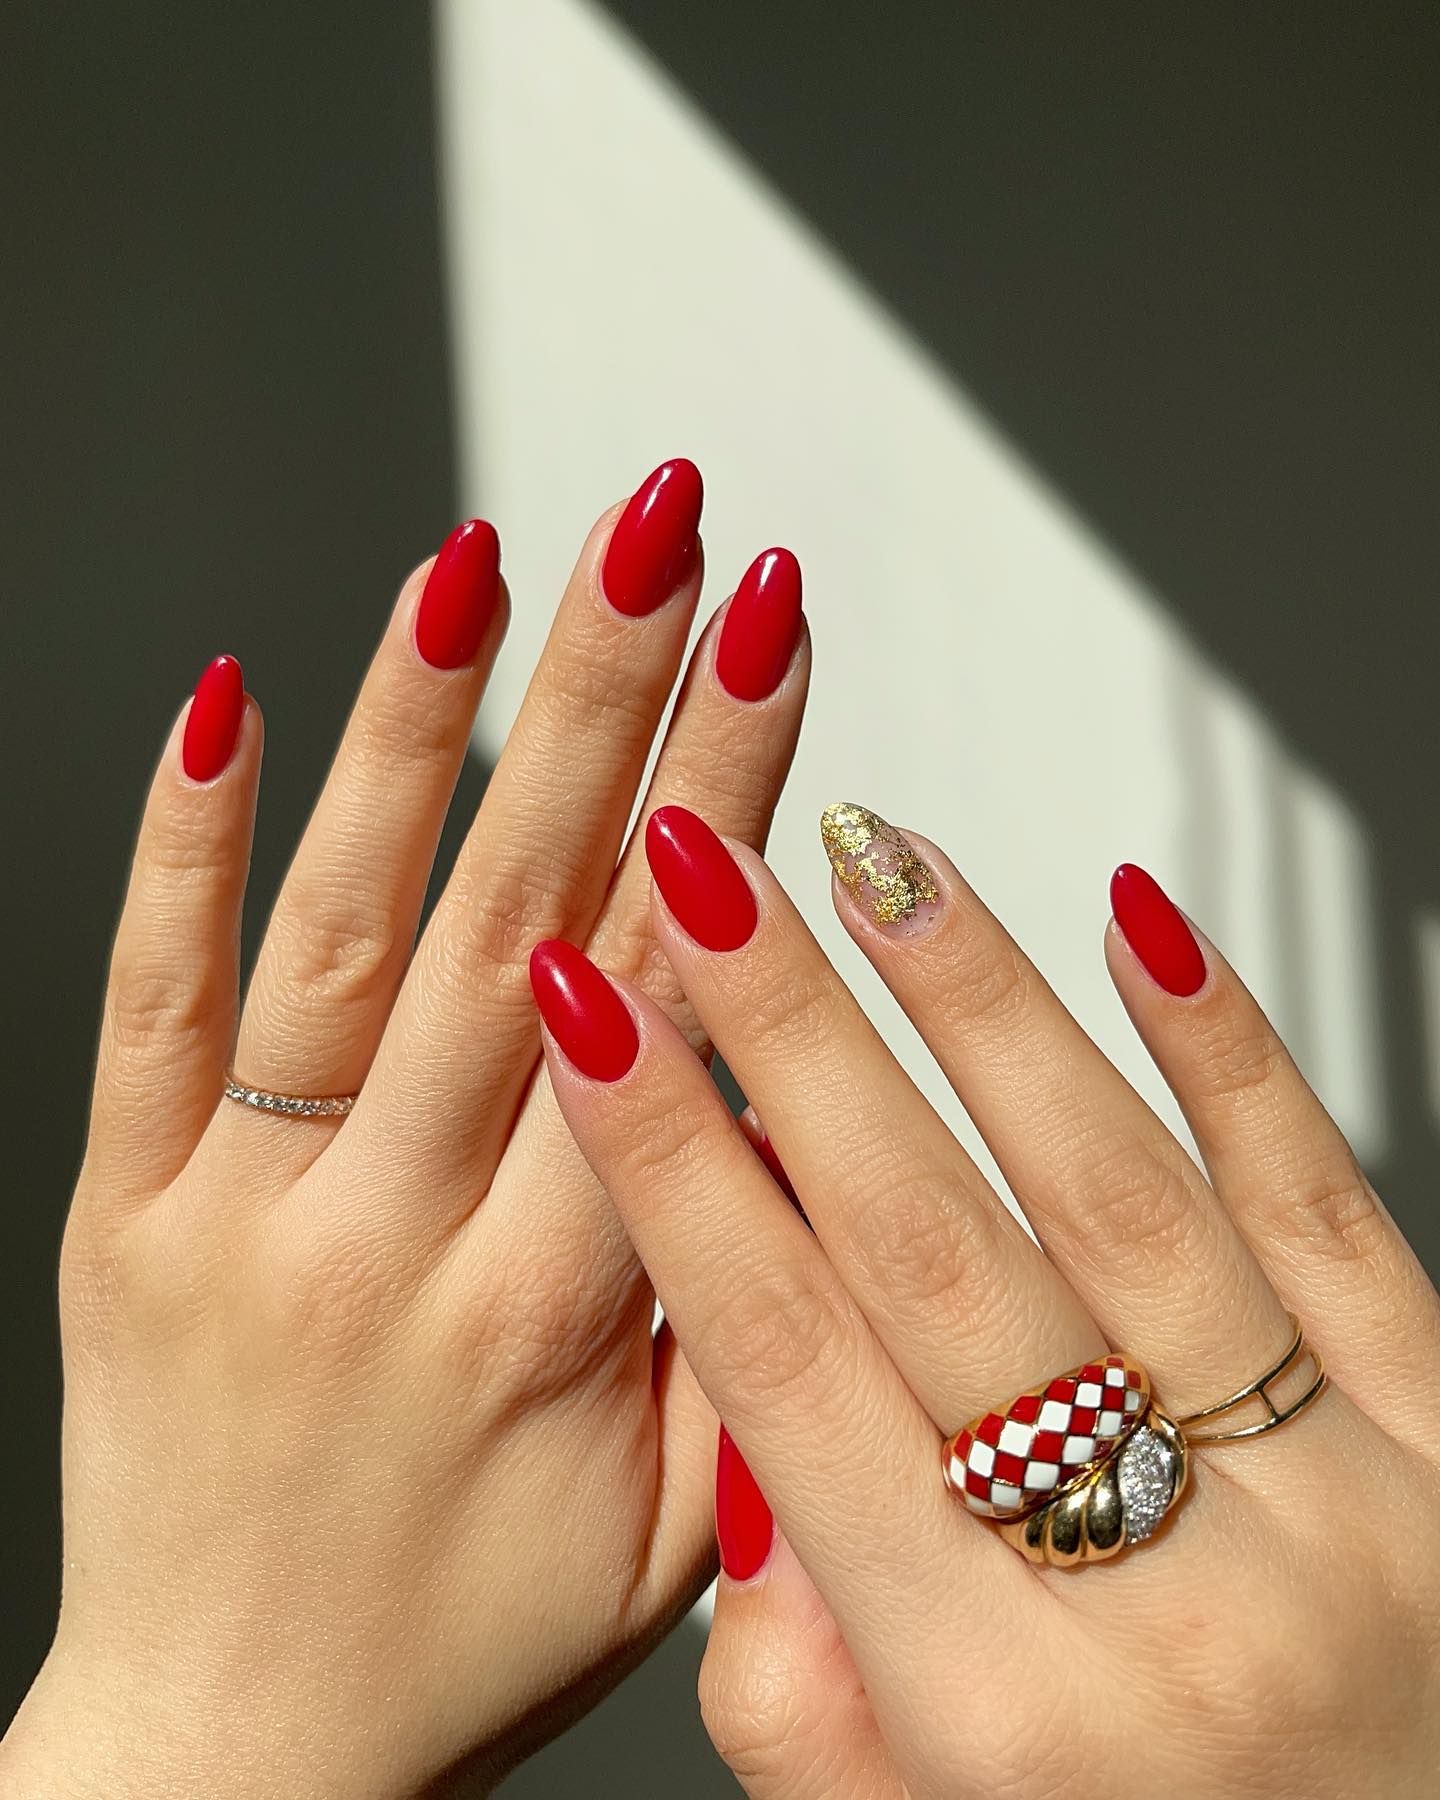 Nude nails, dreamiest winter designs - Ice Cream and Clara